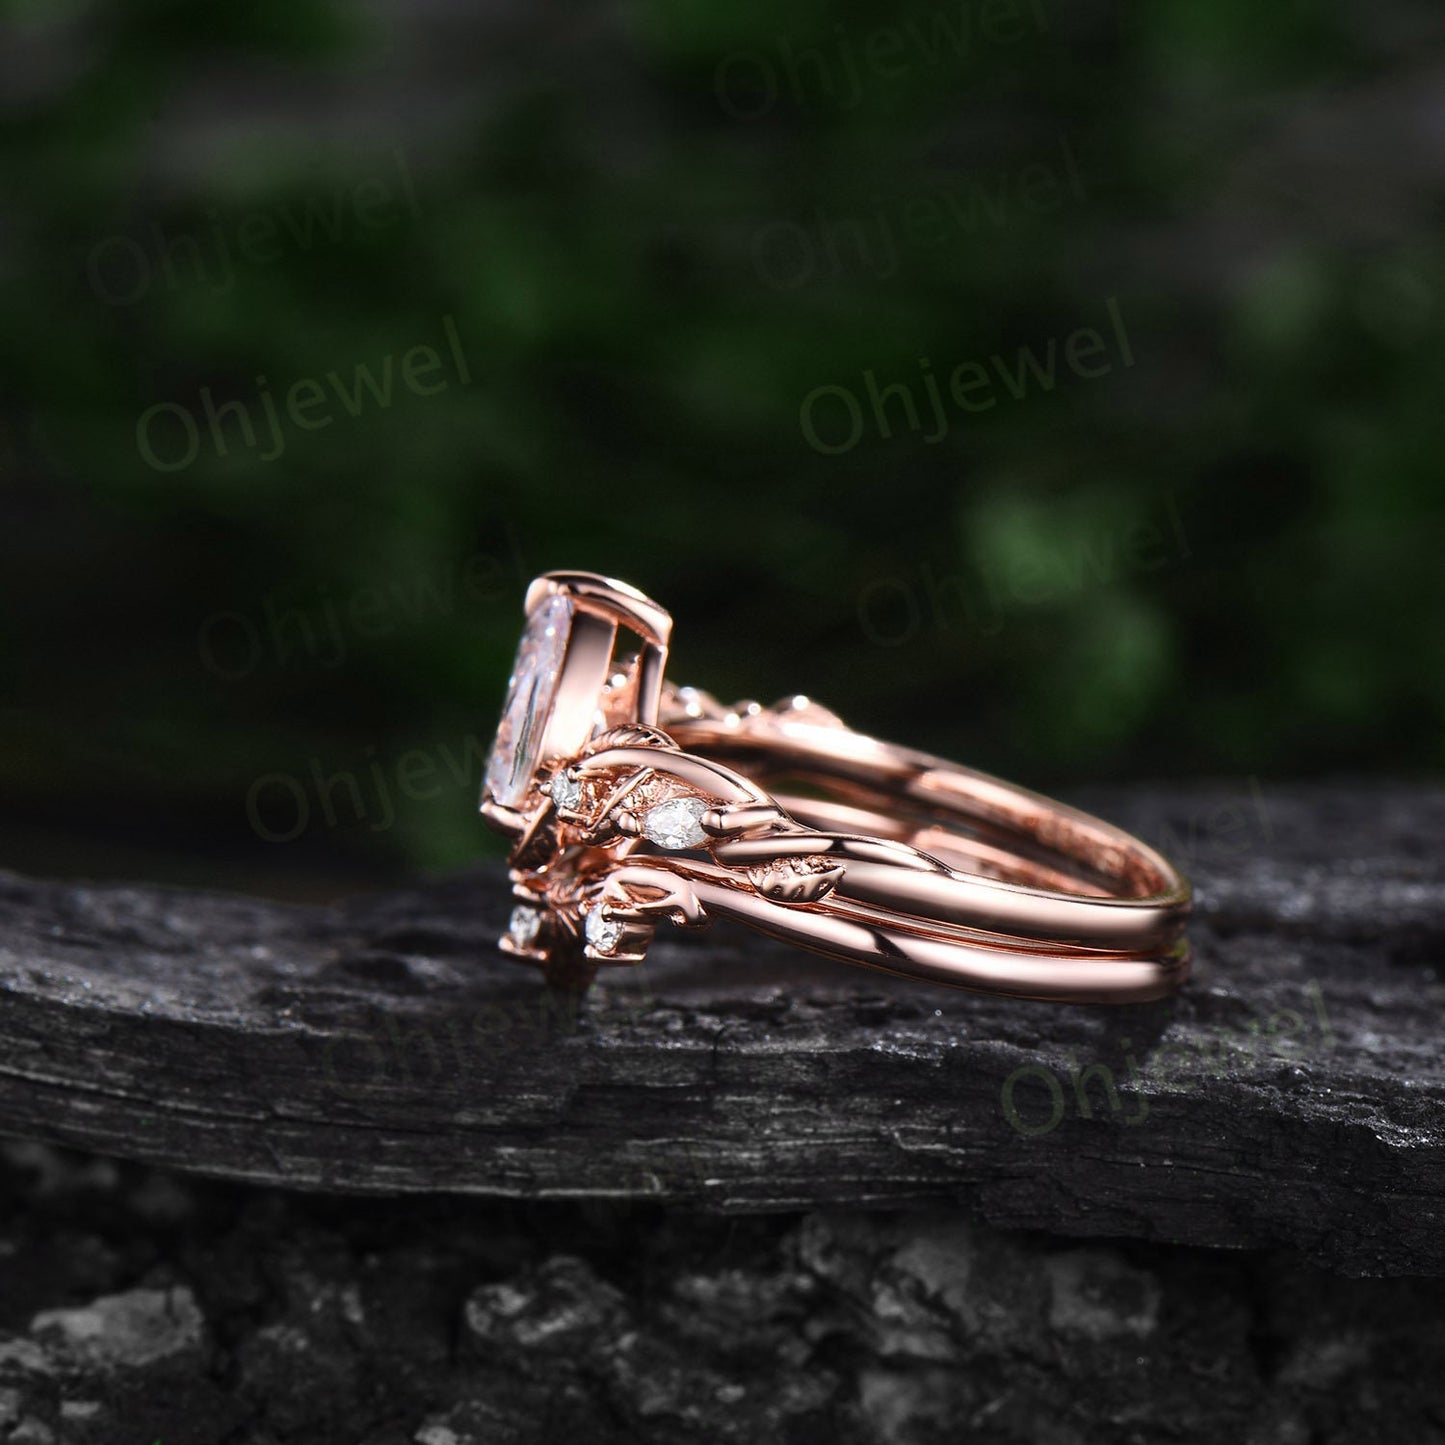 Unique pear shaped pink morganite engagement ring set solid 14k rose gold Twig branch leaf nature inspired diamond anniversary ring women